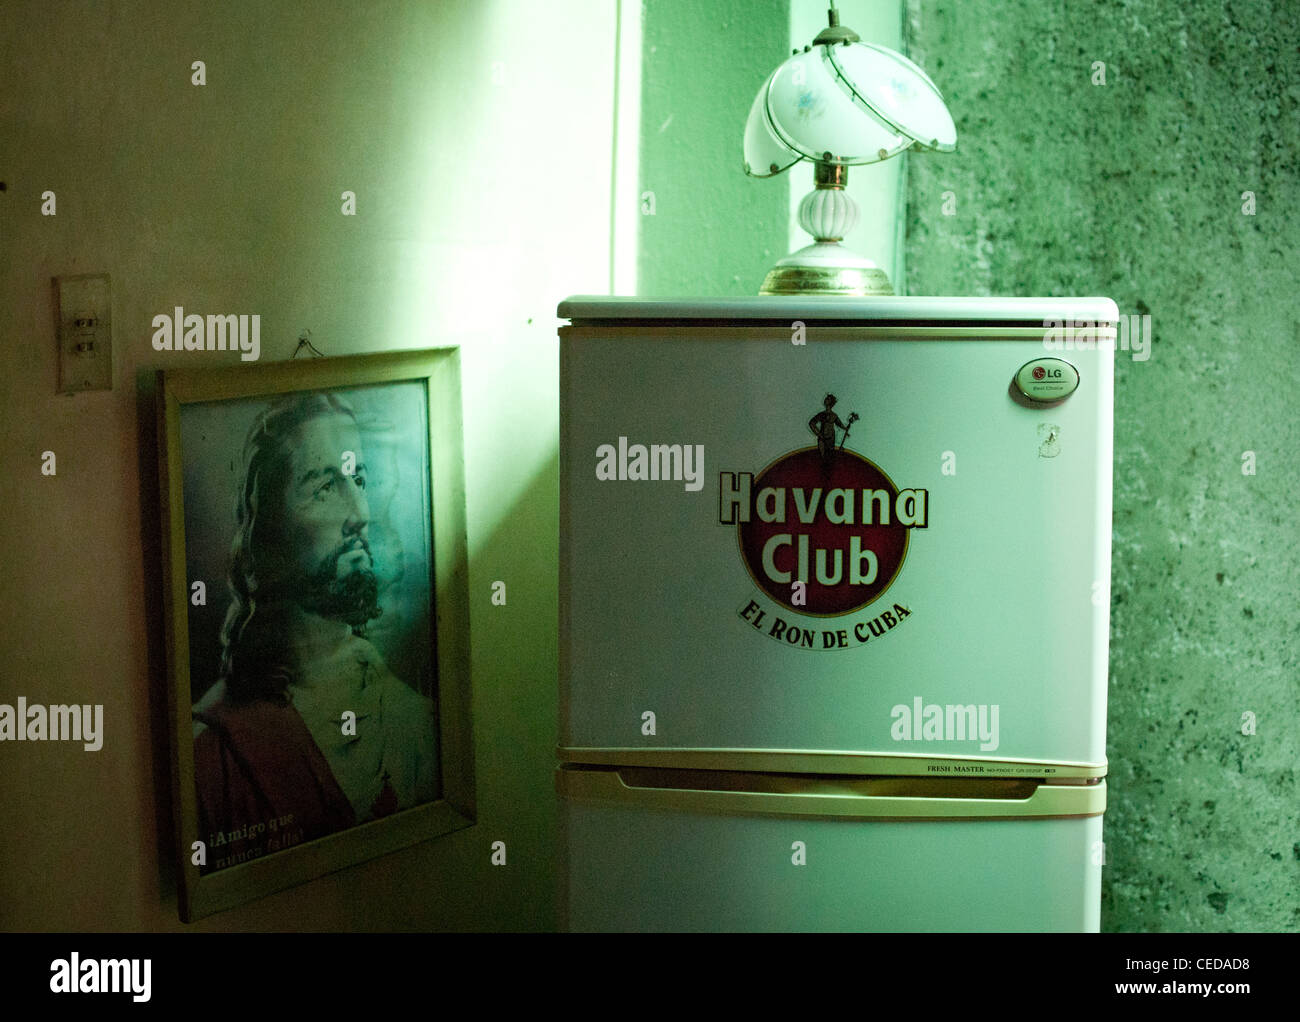 Picture of Jesus and a fridge with Havana Club logo in a private Cuban house Stock Photo